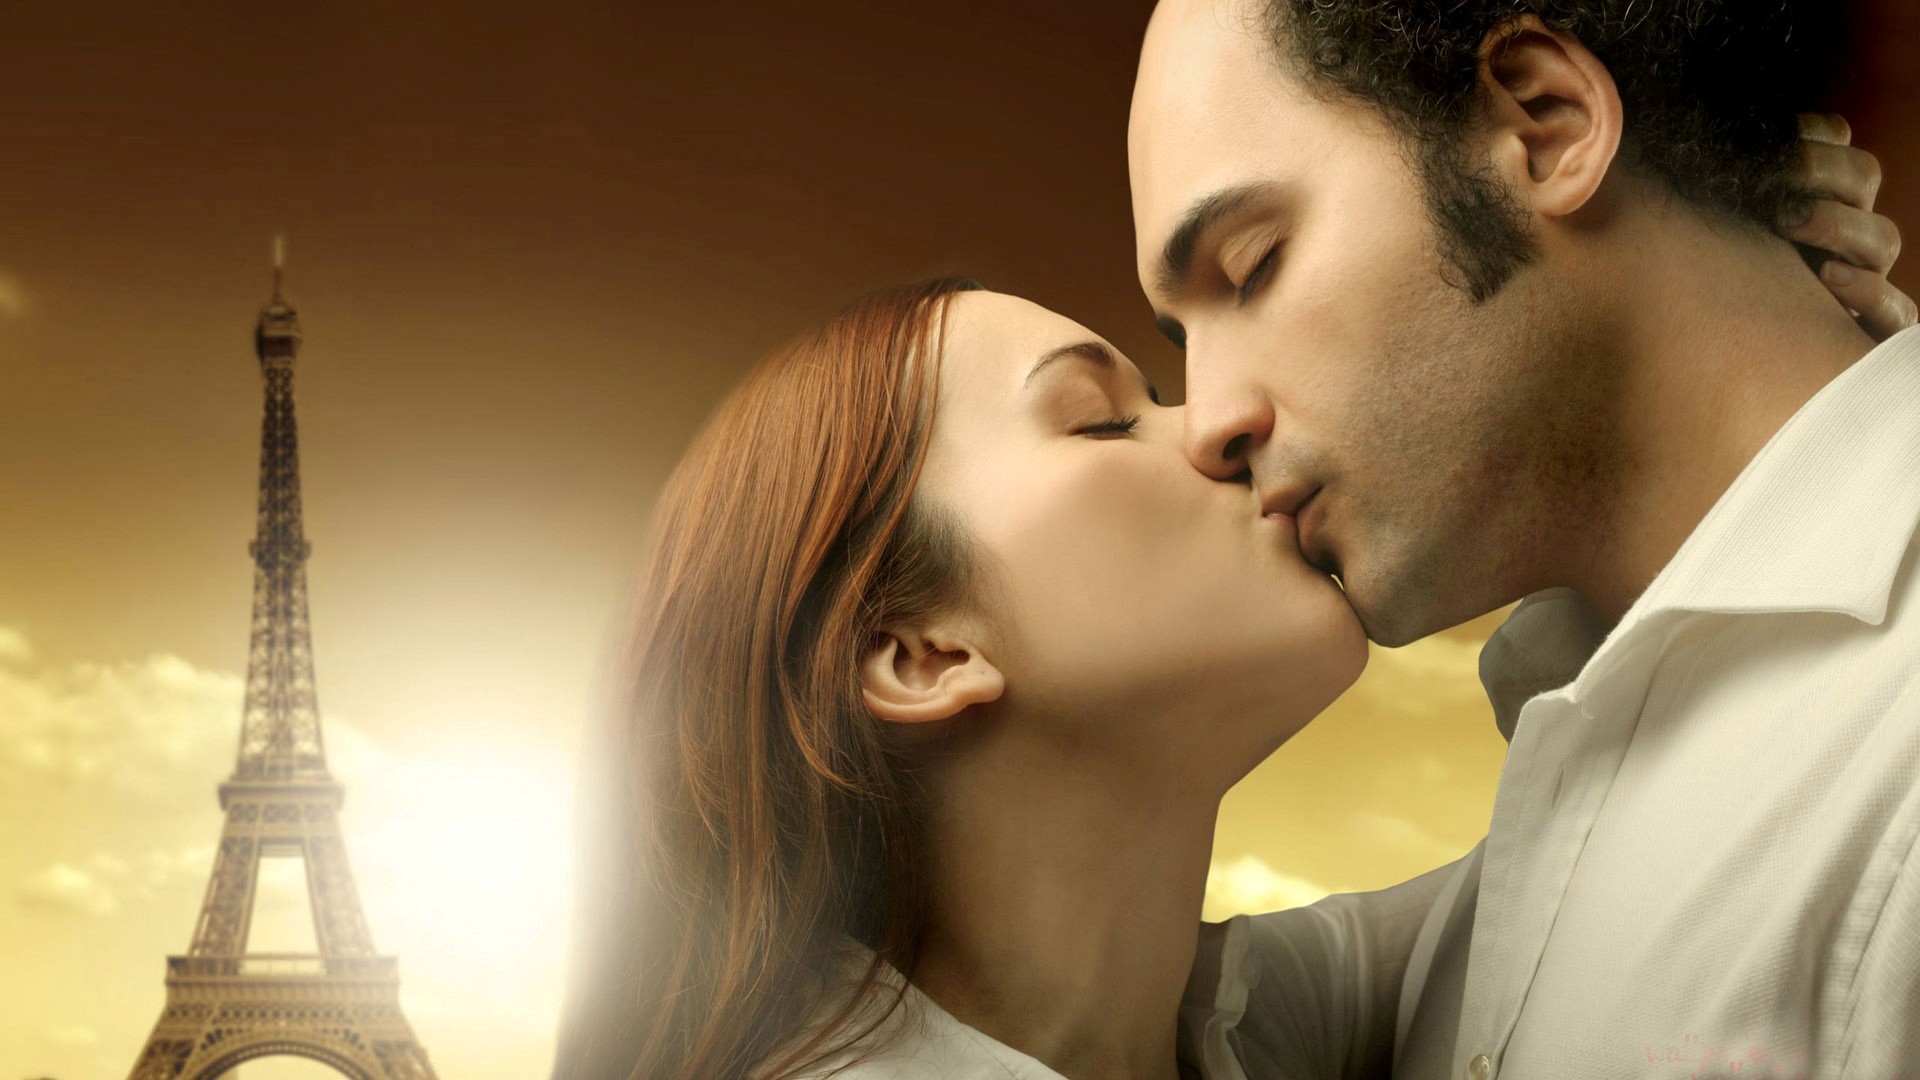 18 Kissing Pictures Of love Couple  HD Kissing Wallpapers of Couples